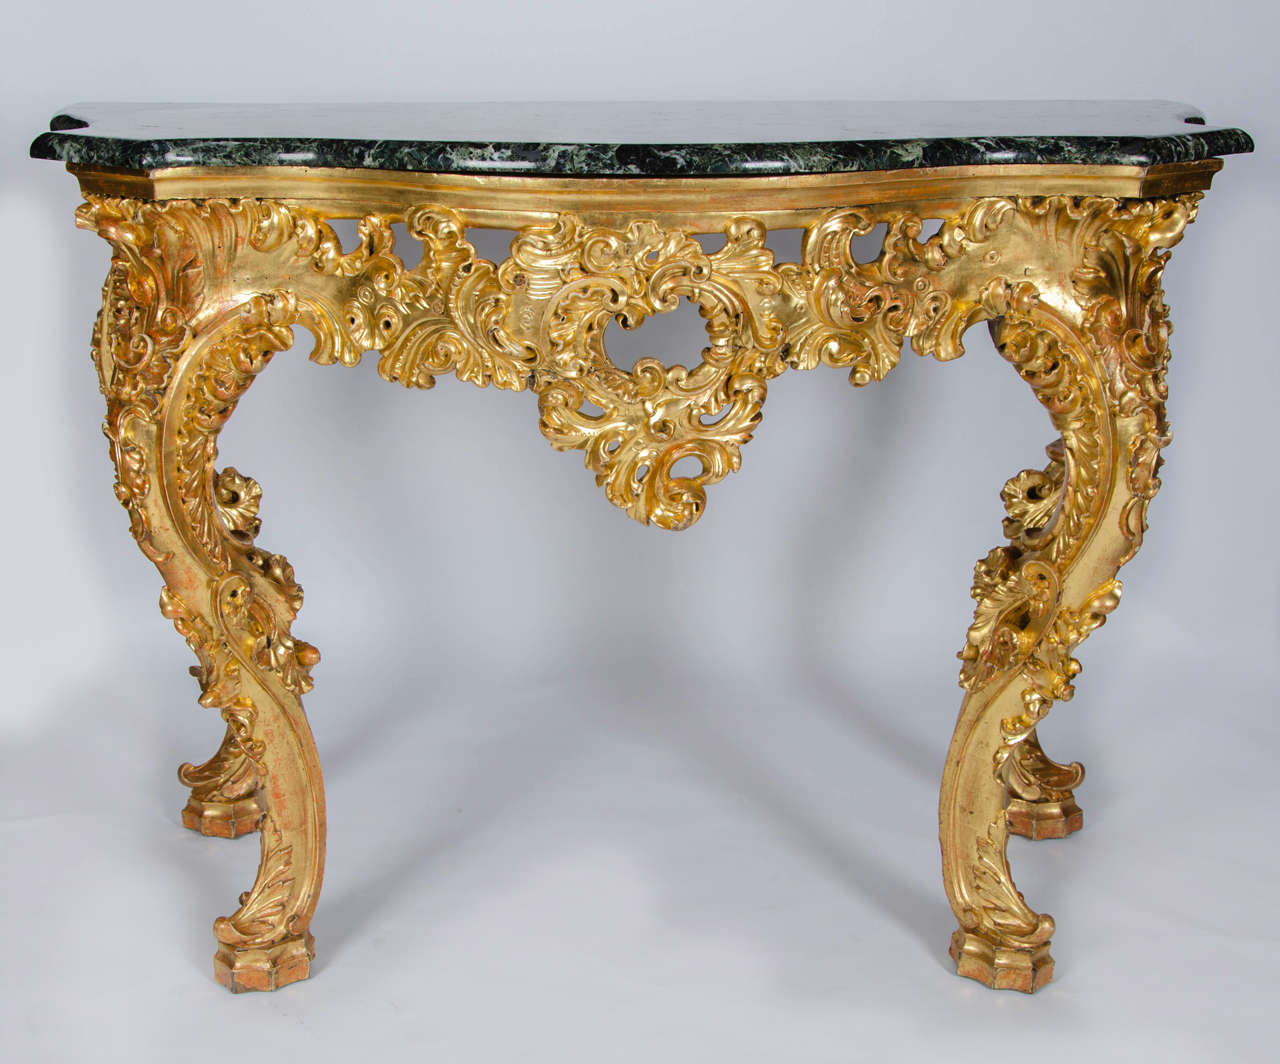 A stunning Rococo revival console table with green marble top.
Excellent, retaining all its original gilding.